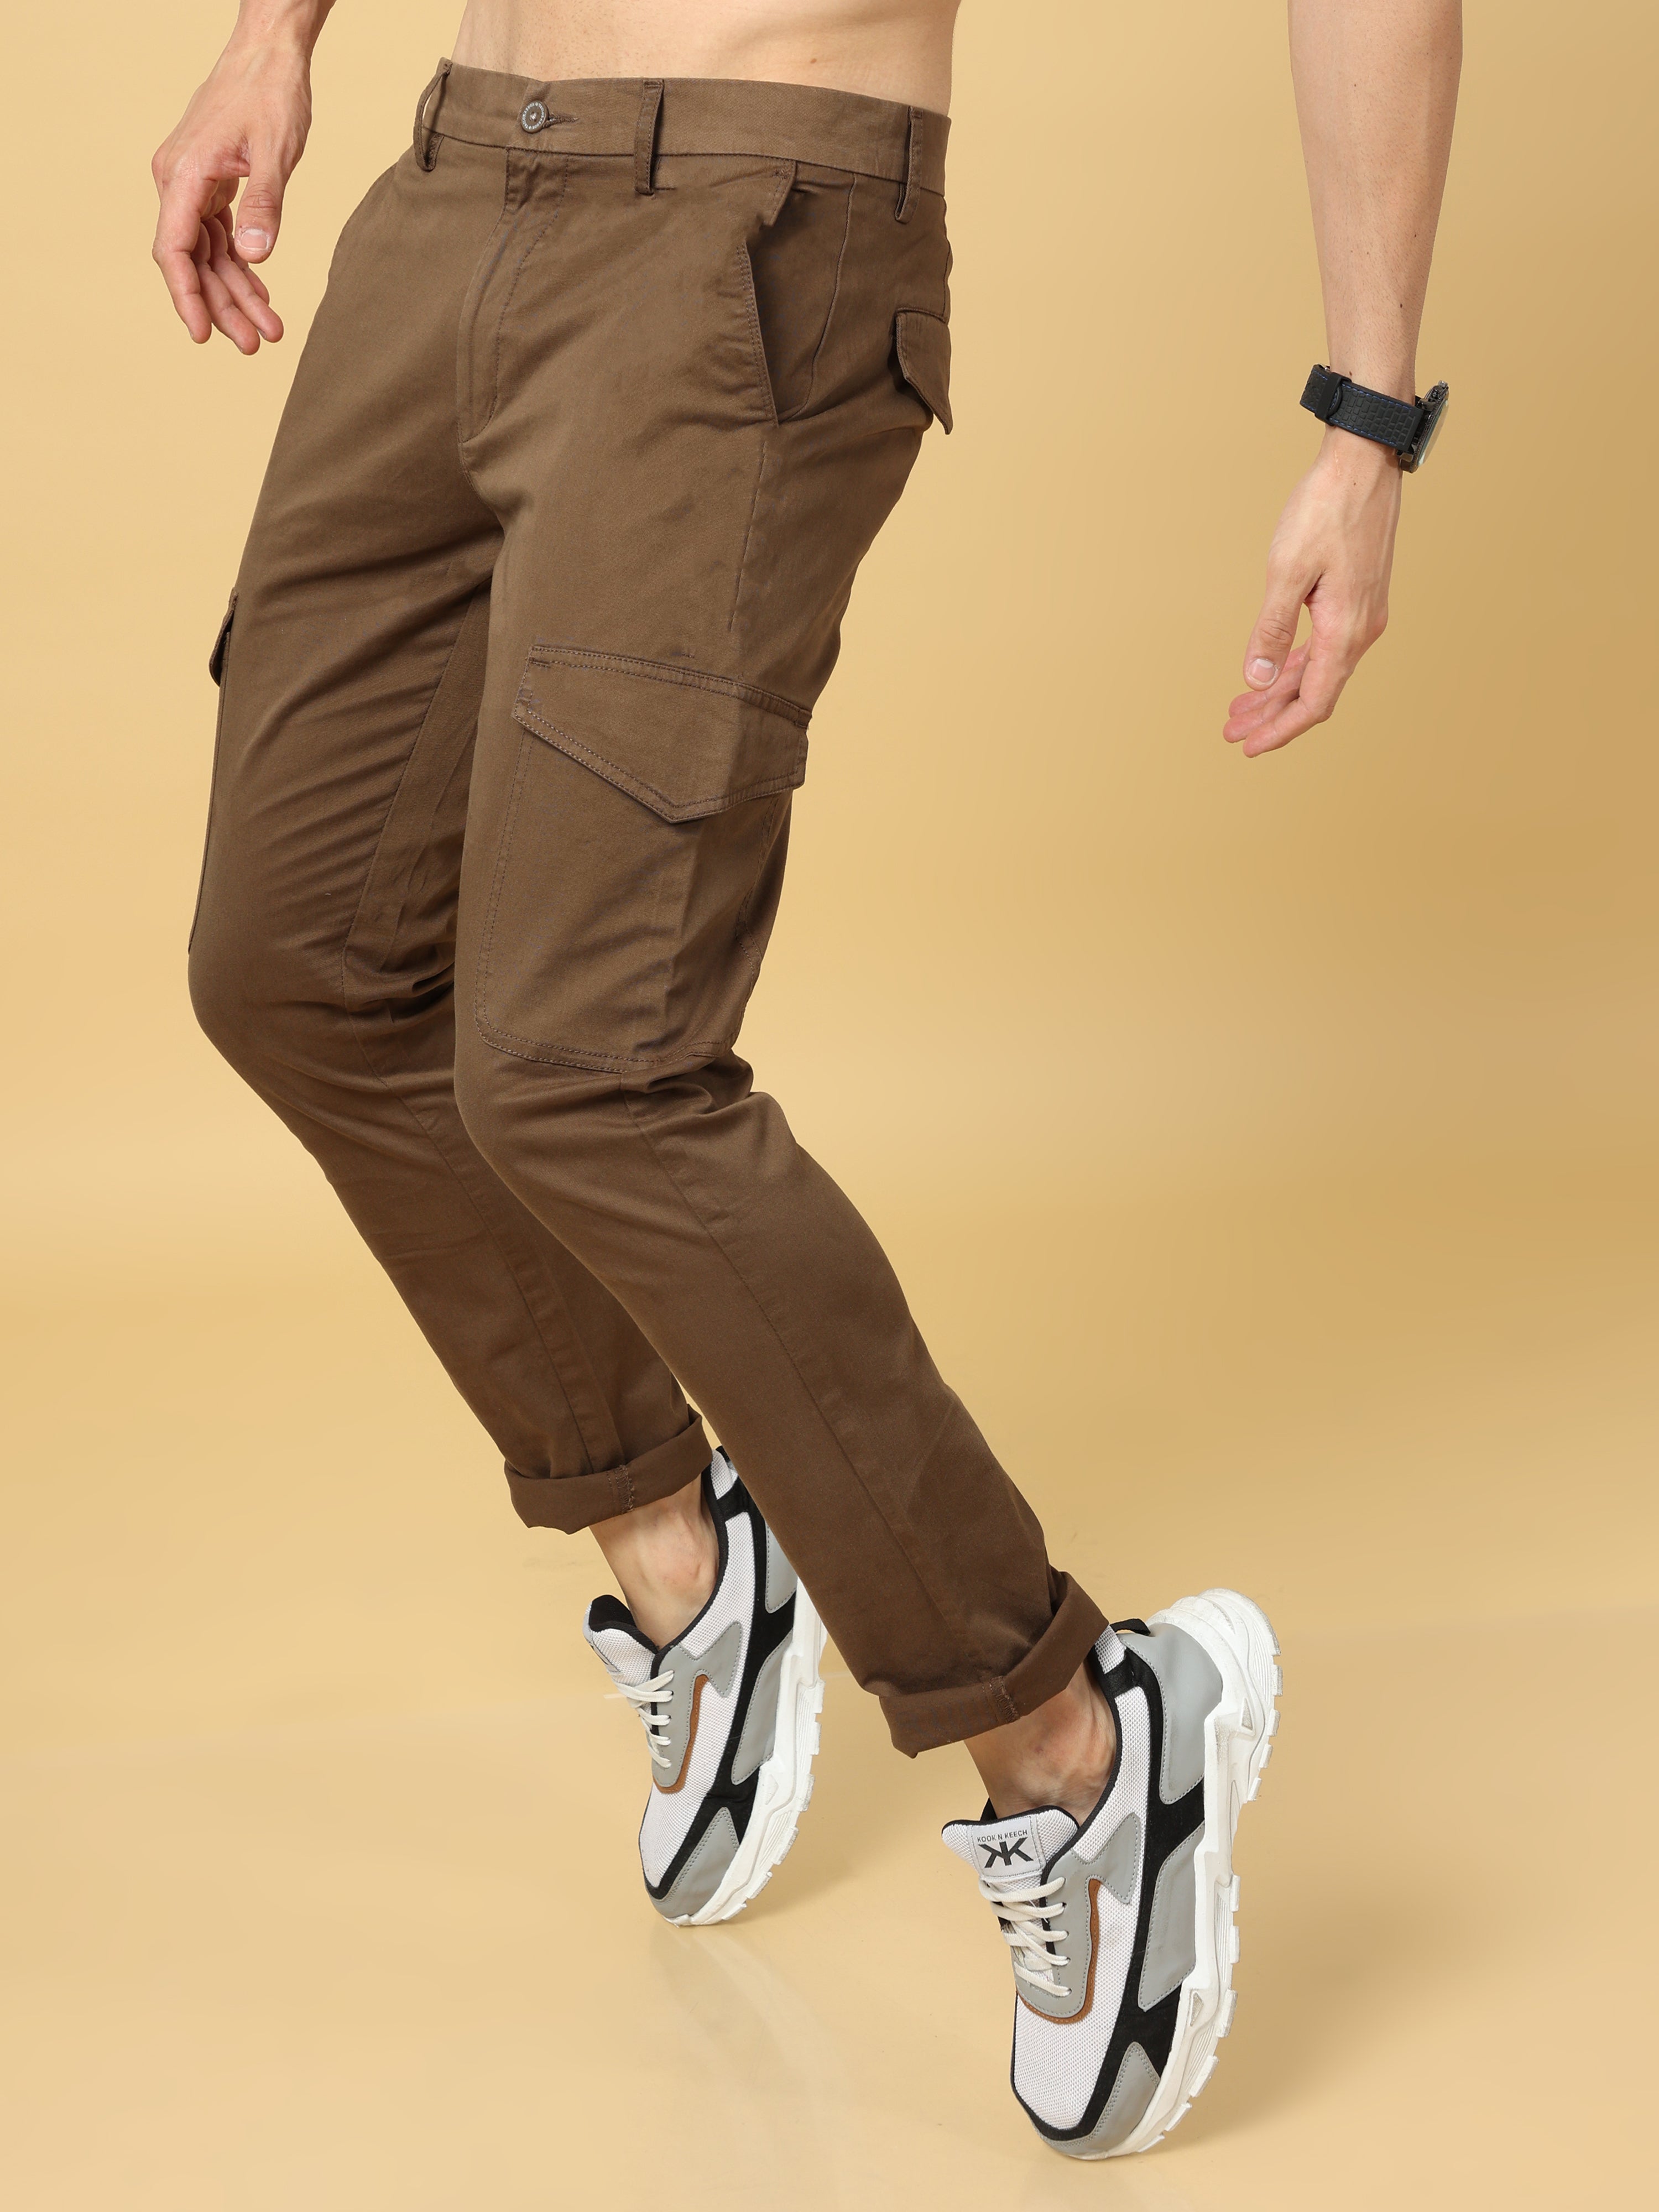 Cargo Pants for Men Relaxed Fit Causal Slim Beach Work Streetwear Khaki  Baggy Pants with Zipper Pockets 01-black Small